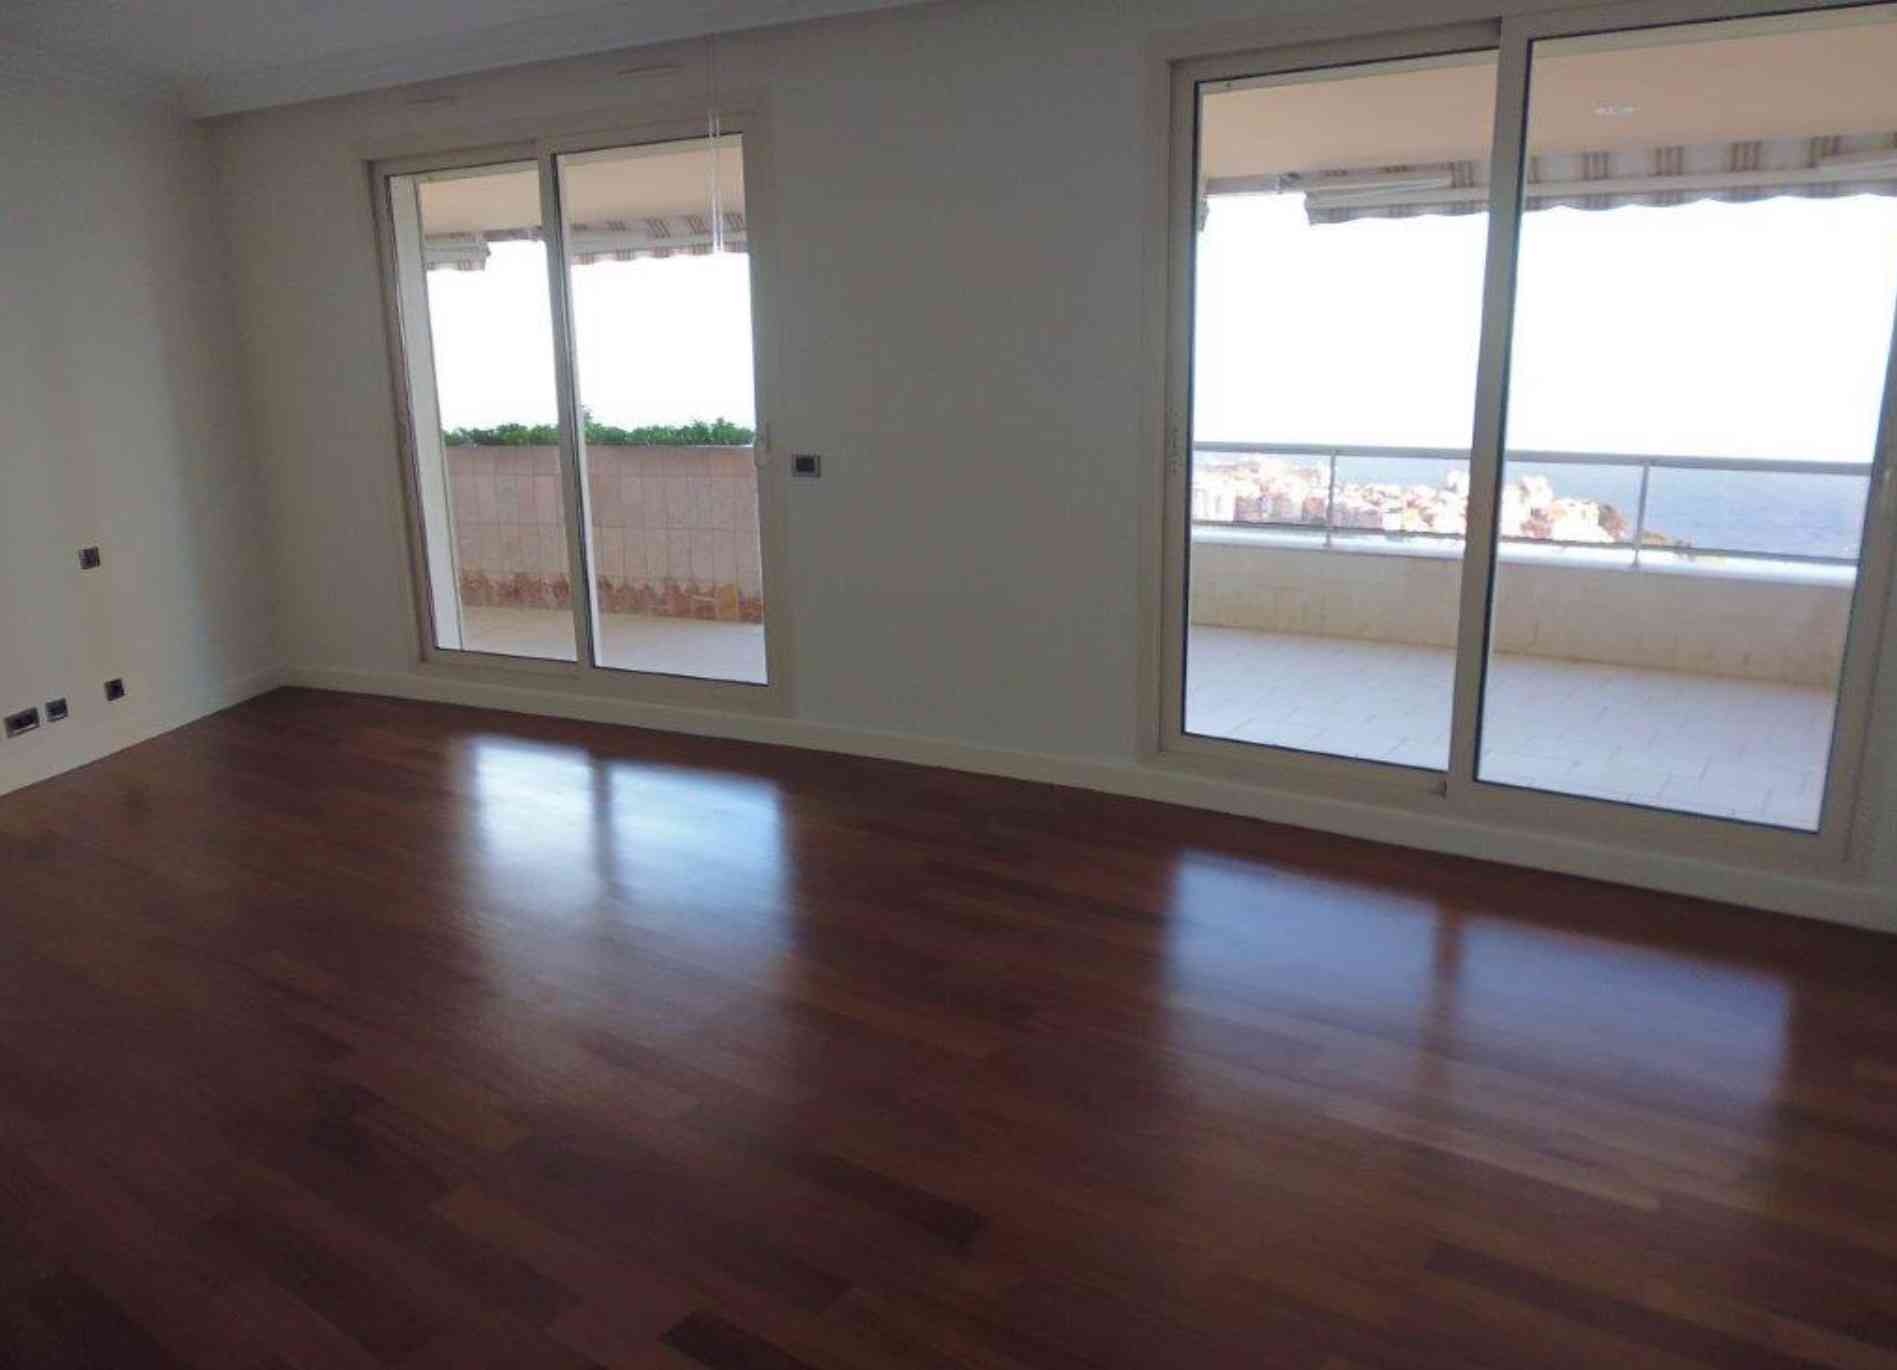                                                                                                                                         LARGE 4-5 MAIN ROOMS APARTMENT, BREATHTAKING VIEW OVER MONACO                                                                    
                                                             